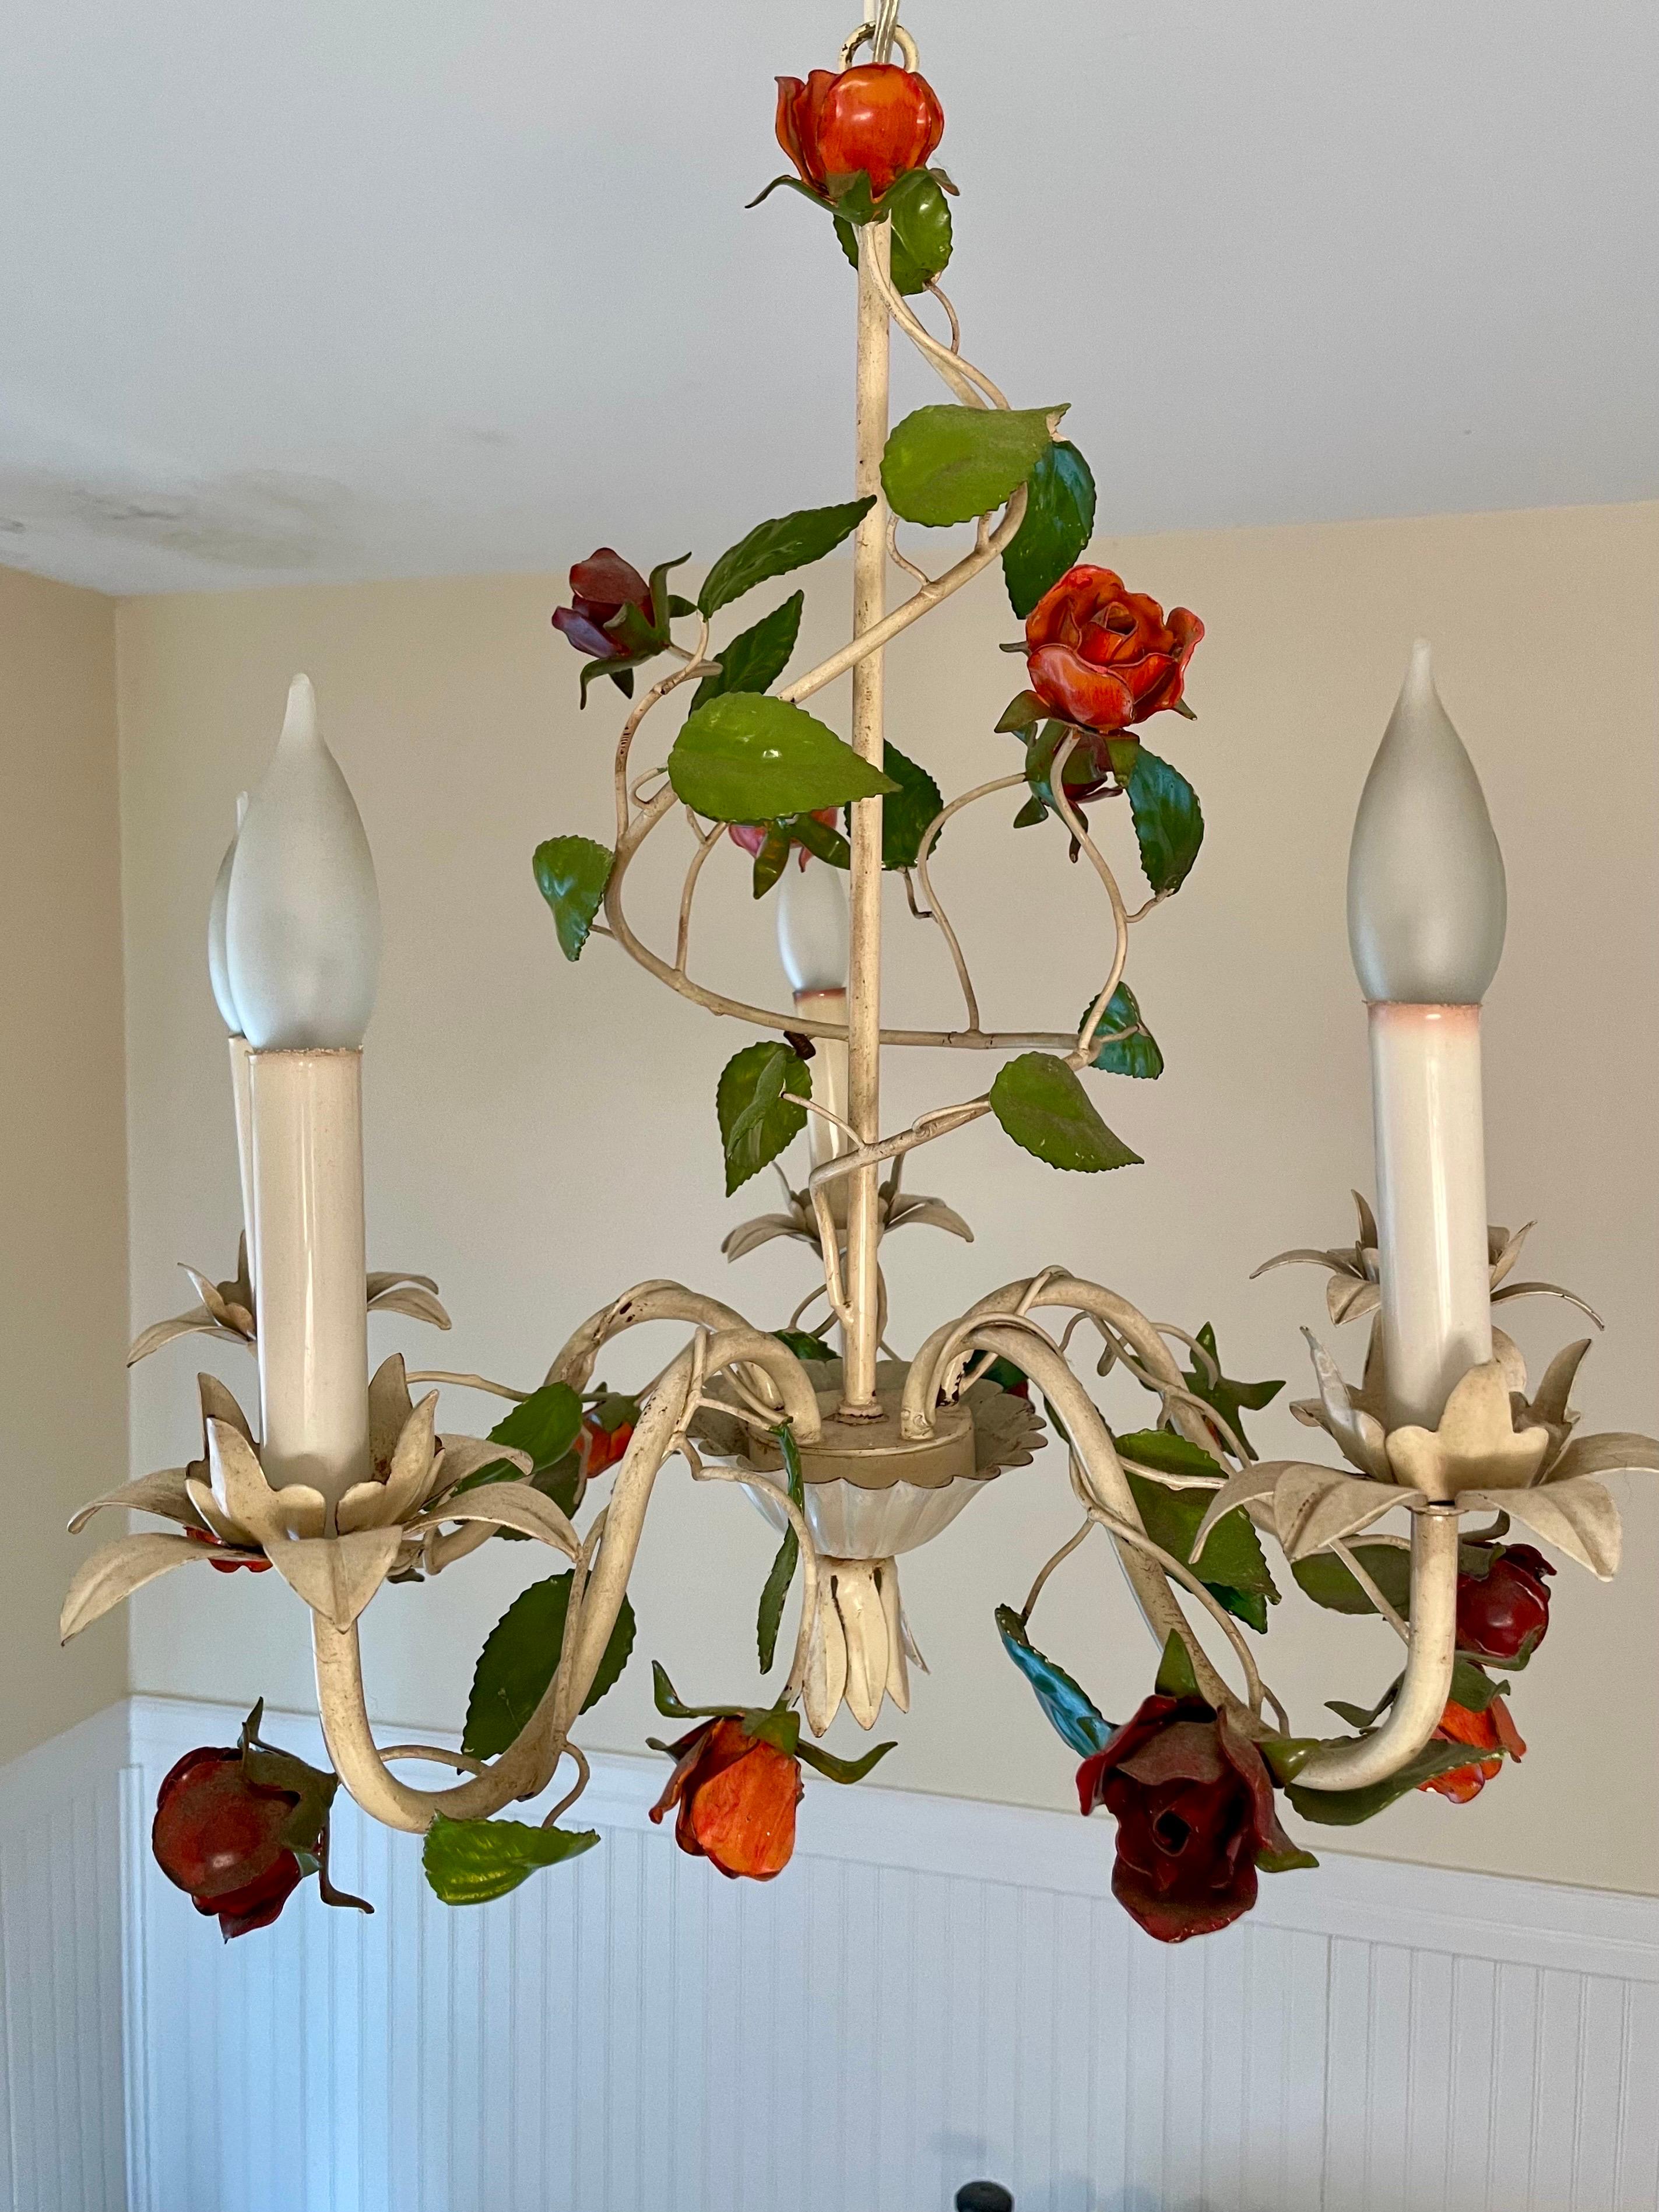 Hollywood Regency tole floral chandelier with red and orange roses and leaves. Original ceiling cap. Made in Italy. Five arms. Measures 20